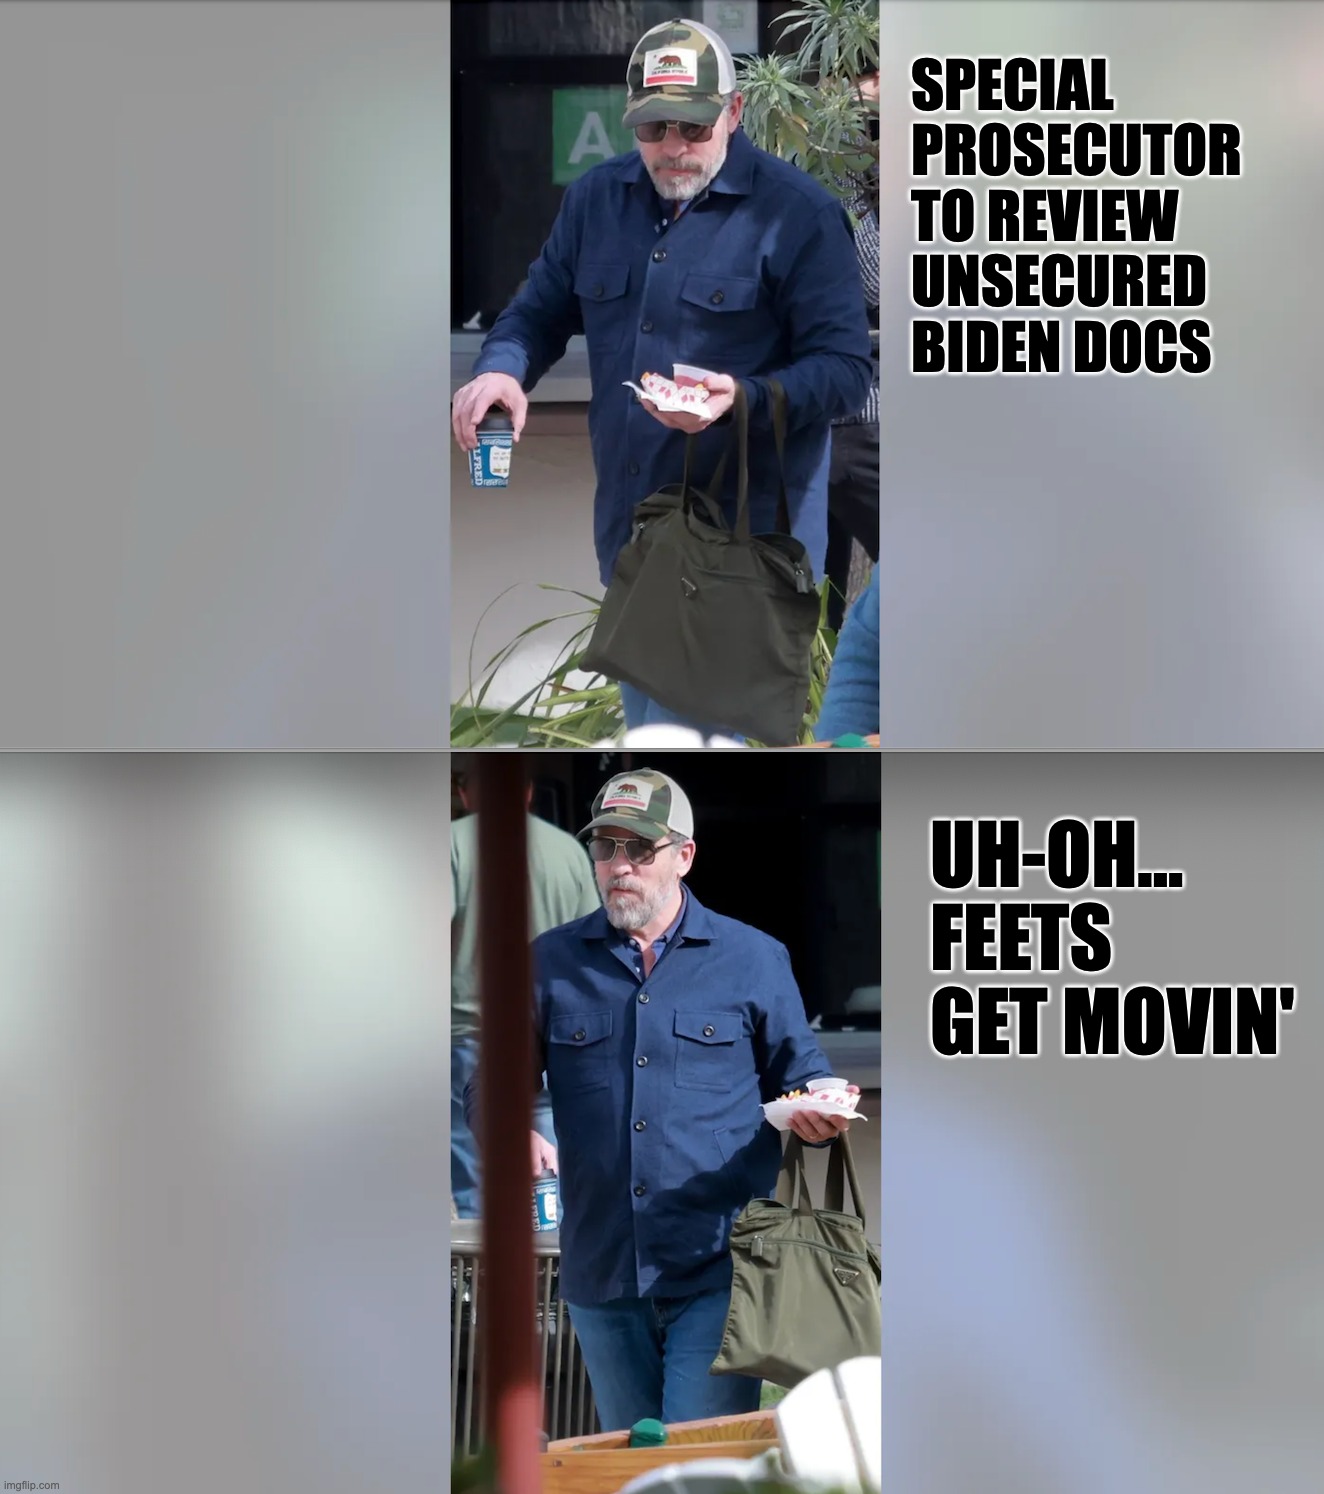 SPECIAL PROSECUTOR TO REVIEW UNSECURED BIDEN DOCS; UH-OH...
FEETS GET MOVIN' | image tagged in hunter biden,oops,joe biden,corruption | made w/ Imgflip meme maker